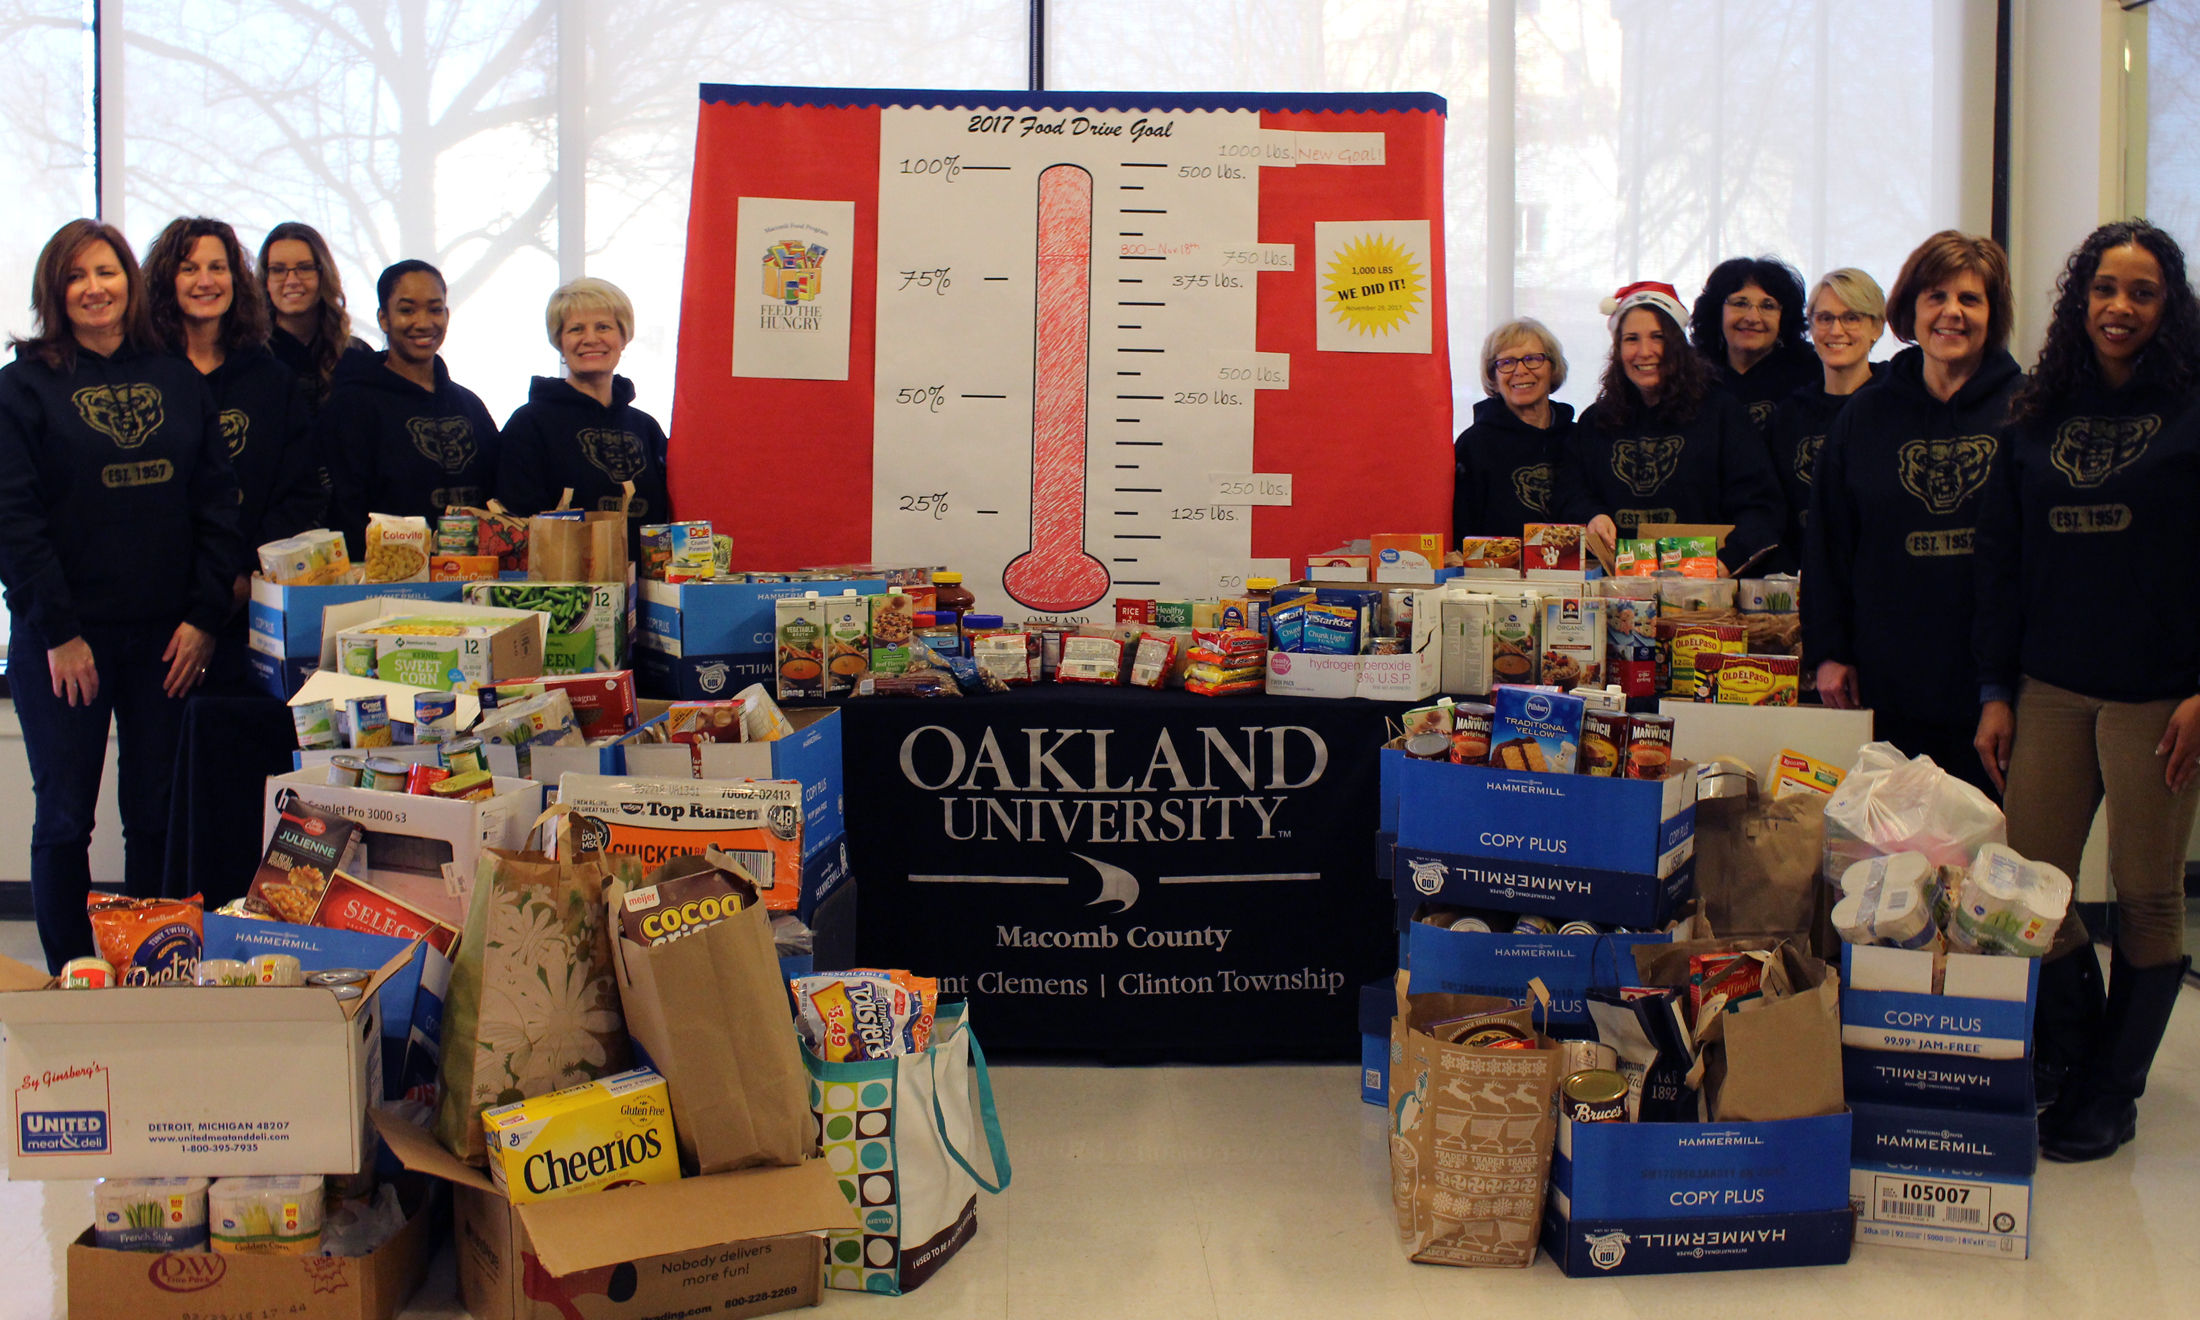 Oakland University faculty, students and staff in black golden grizzly sweatshirts stand behind a table overflowing with canned food in celebration of exceeding their food drive goal in Macomb County